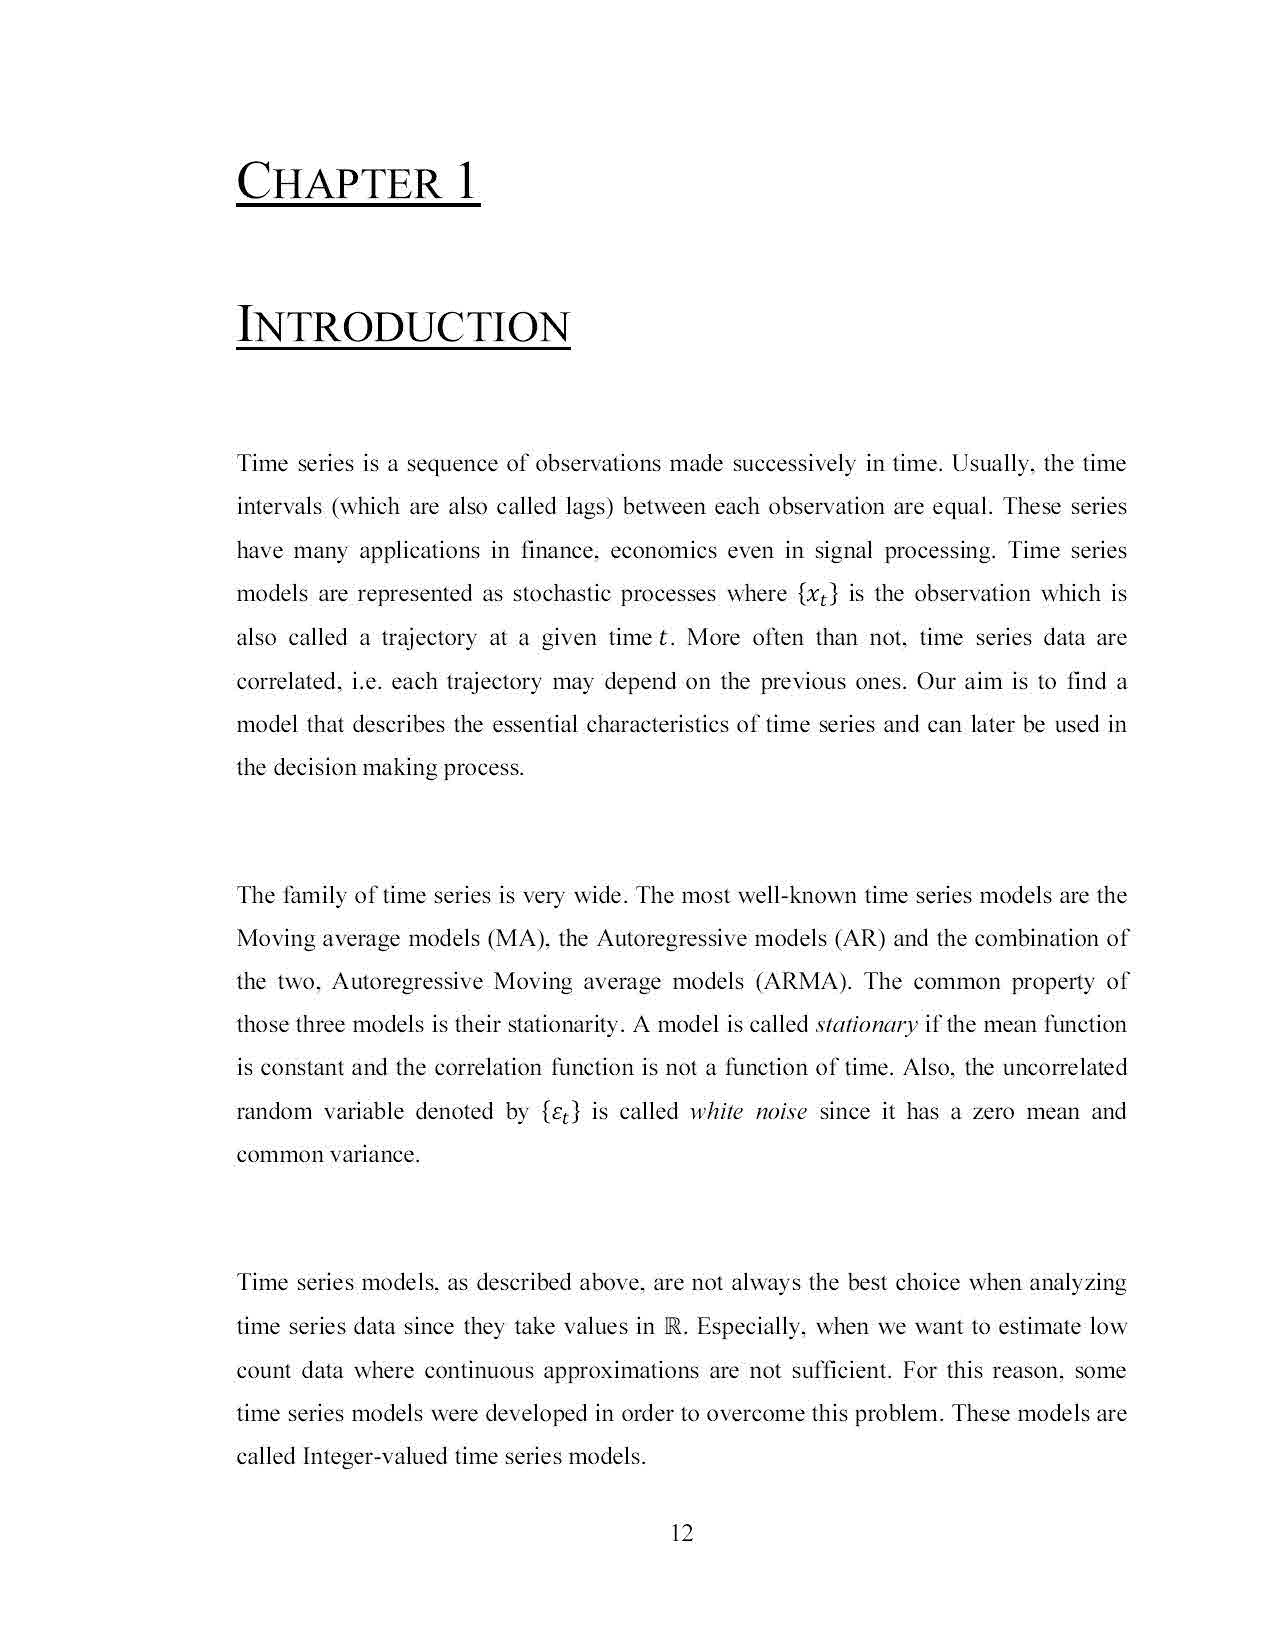 Acknowledgements phd thesis